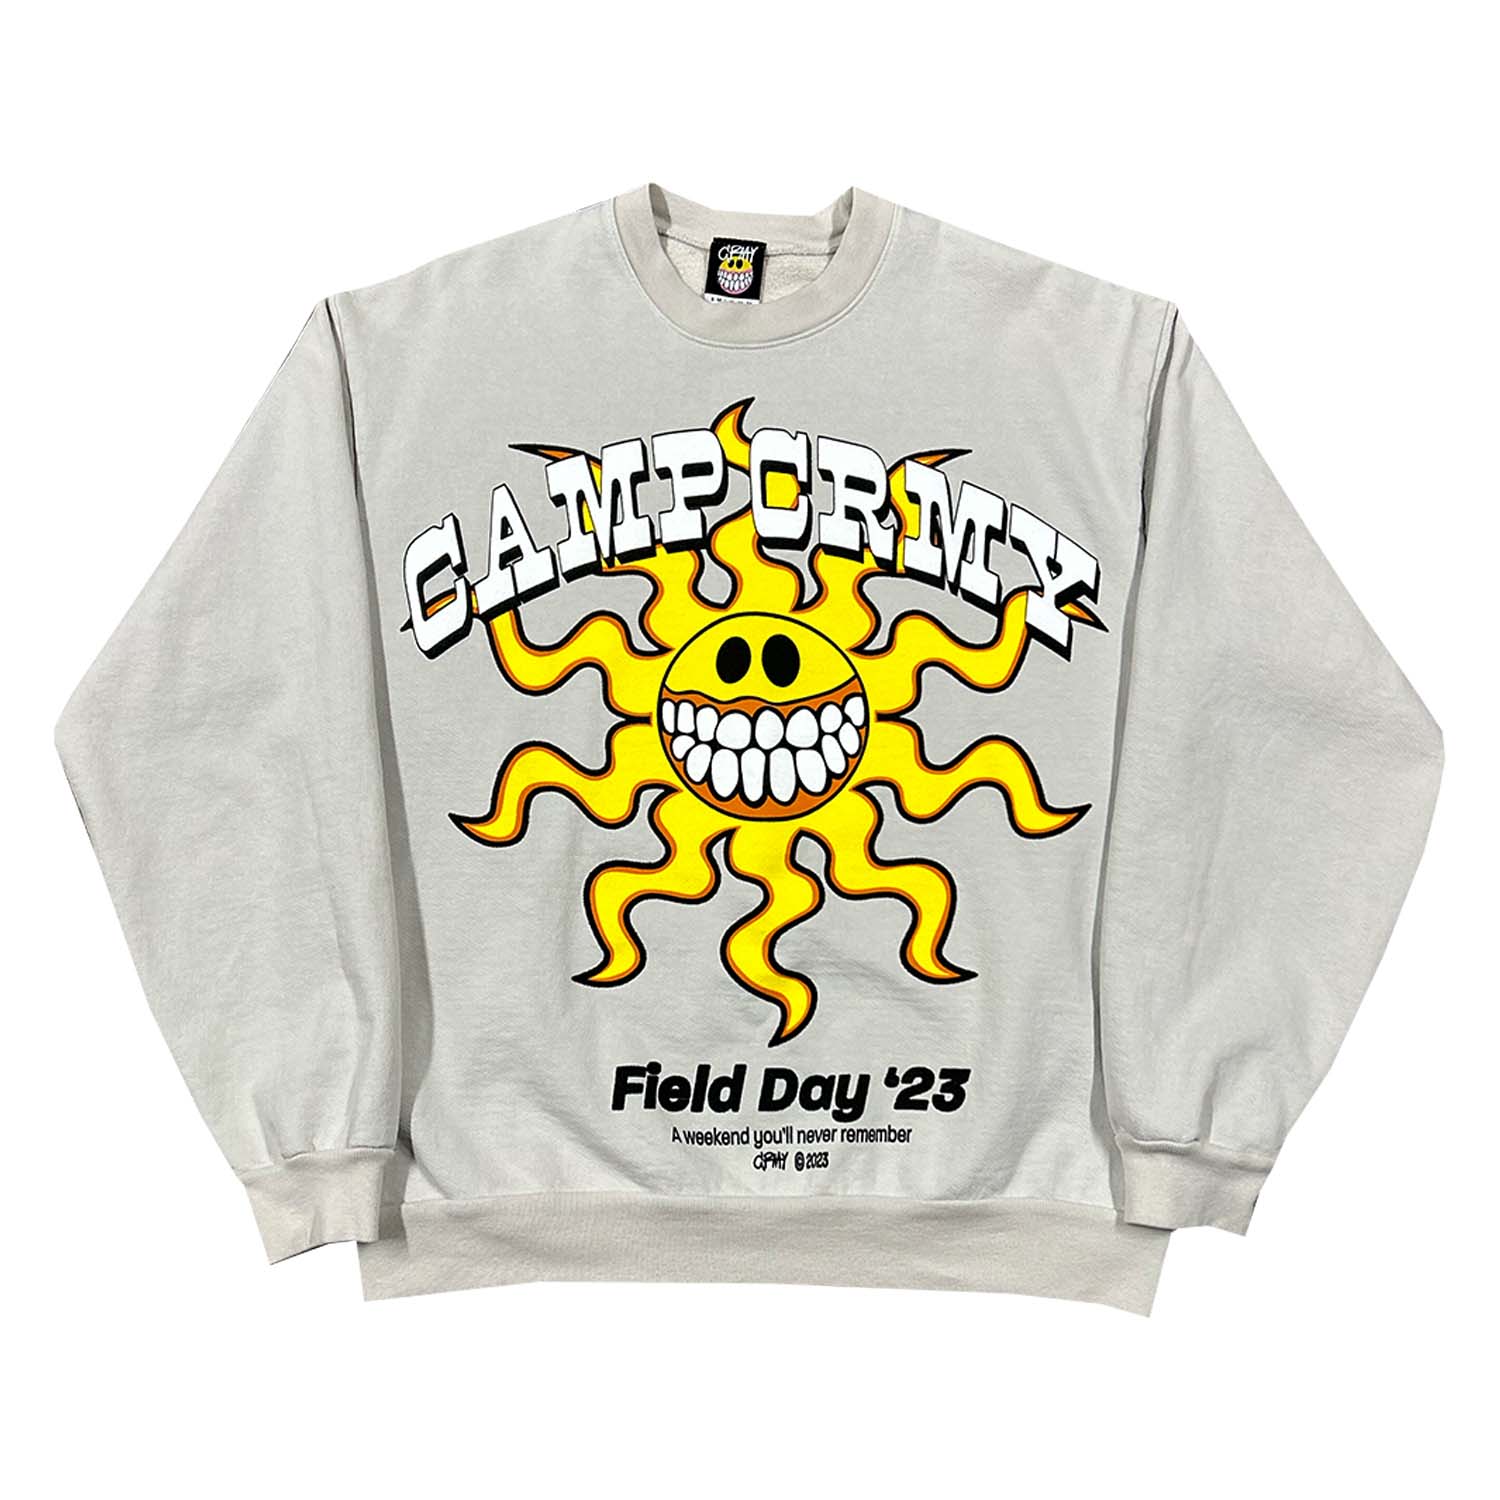 The Offical Camp CRMY Field Day' 23 Sweatshirt